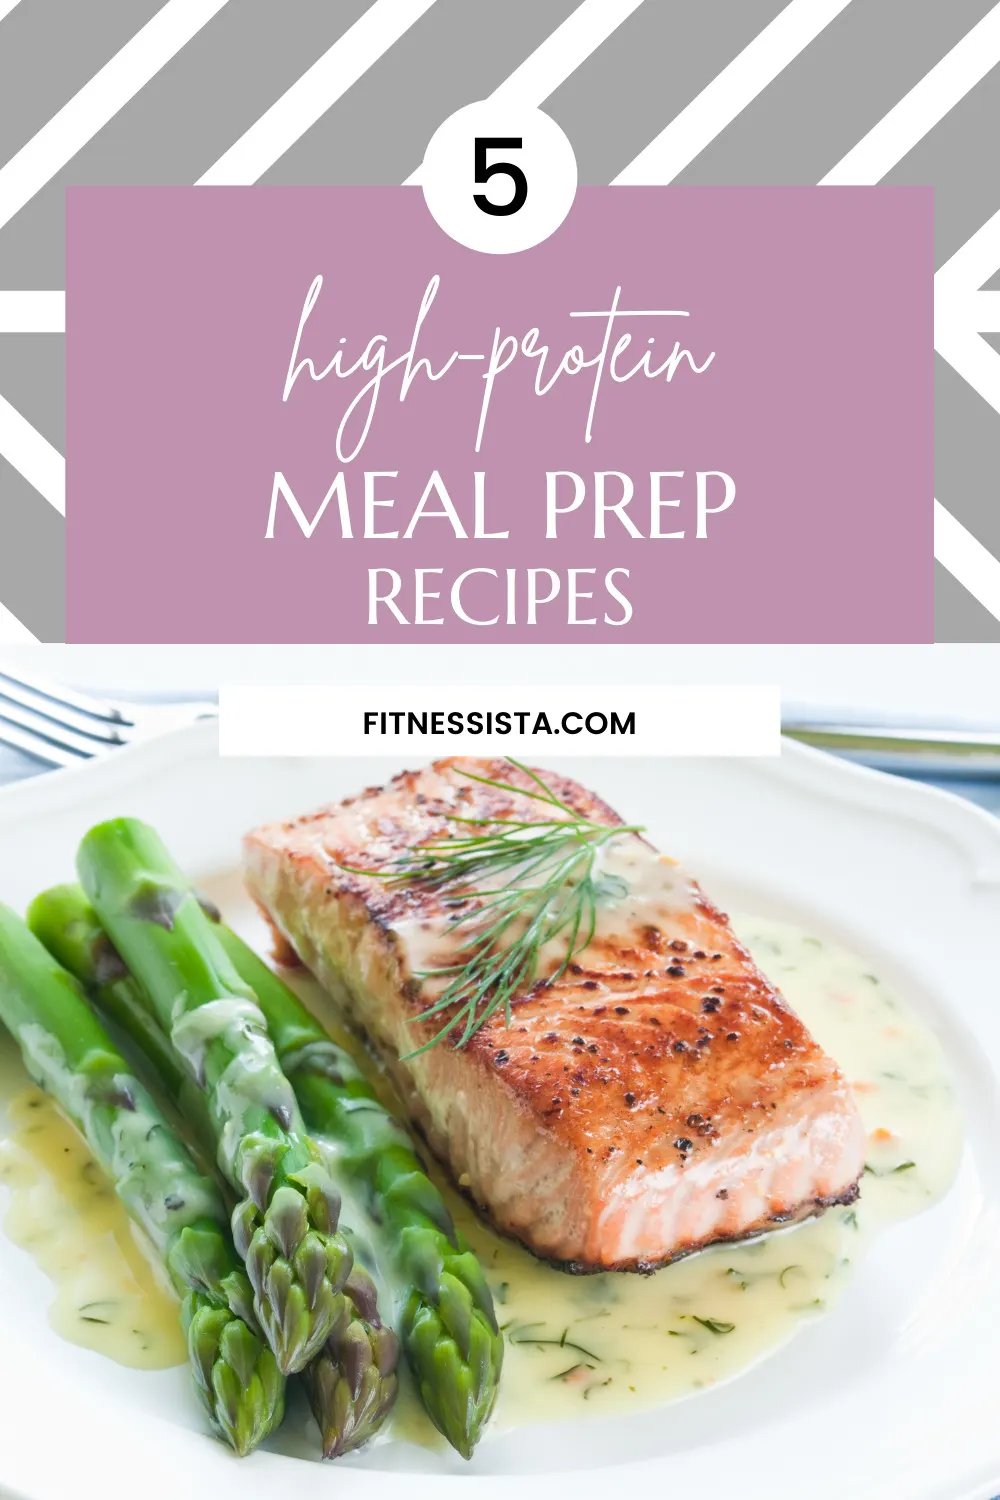 high protein meal prep recipes.jpg - 5 High Protein Meal Prep Recipes